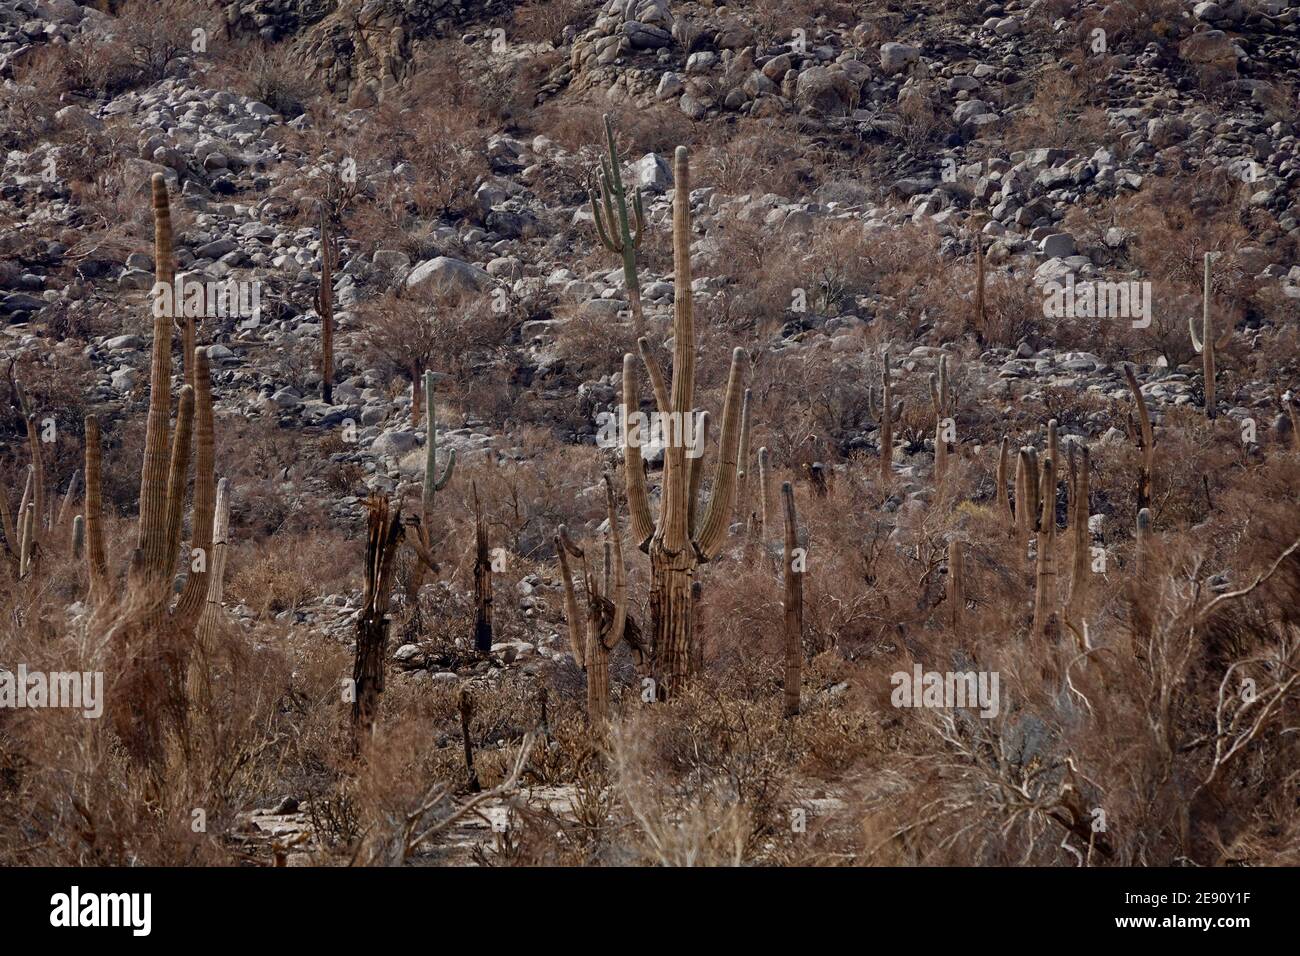 A view of the desert outside of Phoenix, Arizona after a wildfire. Stock Photo